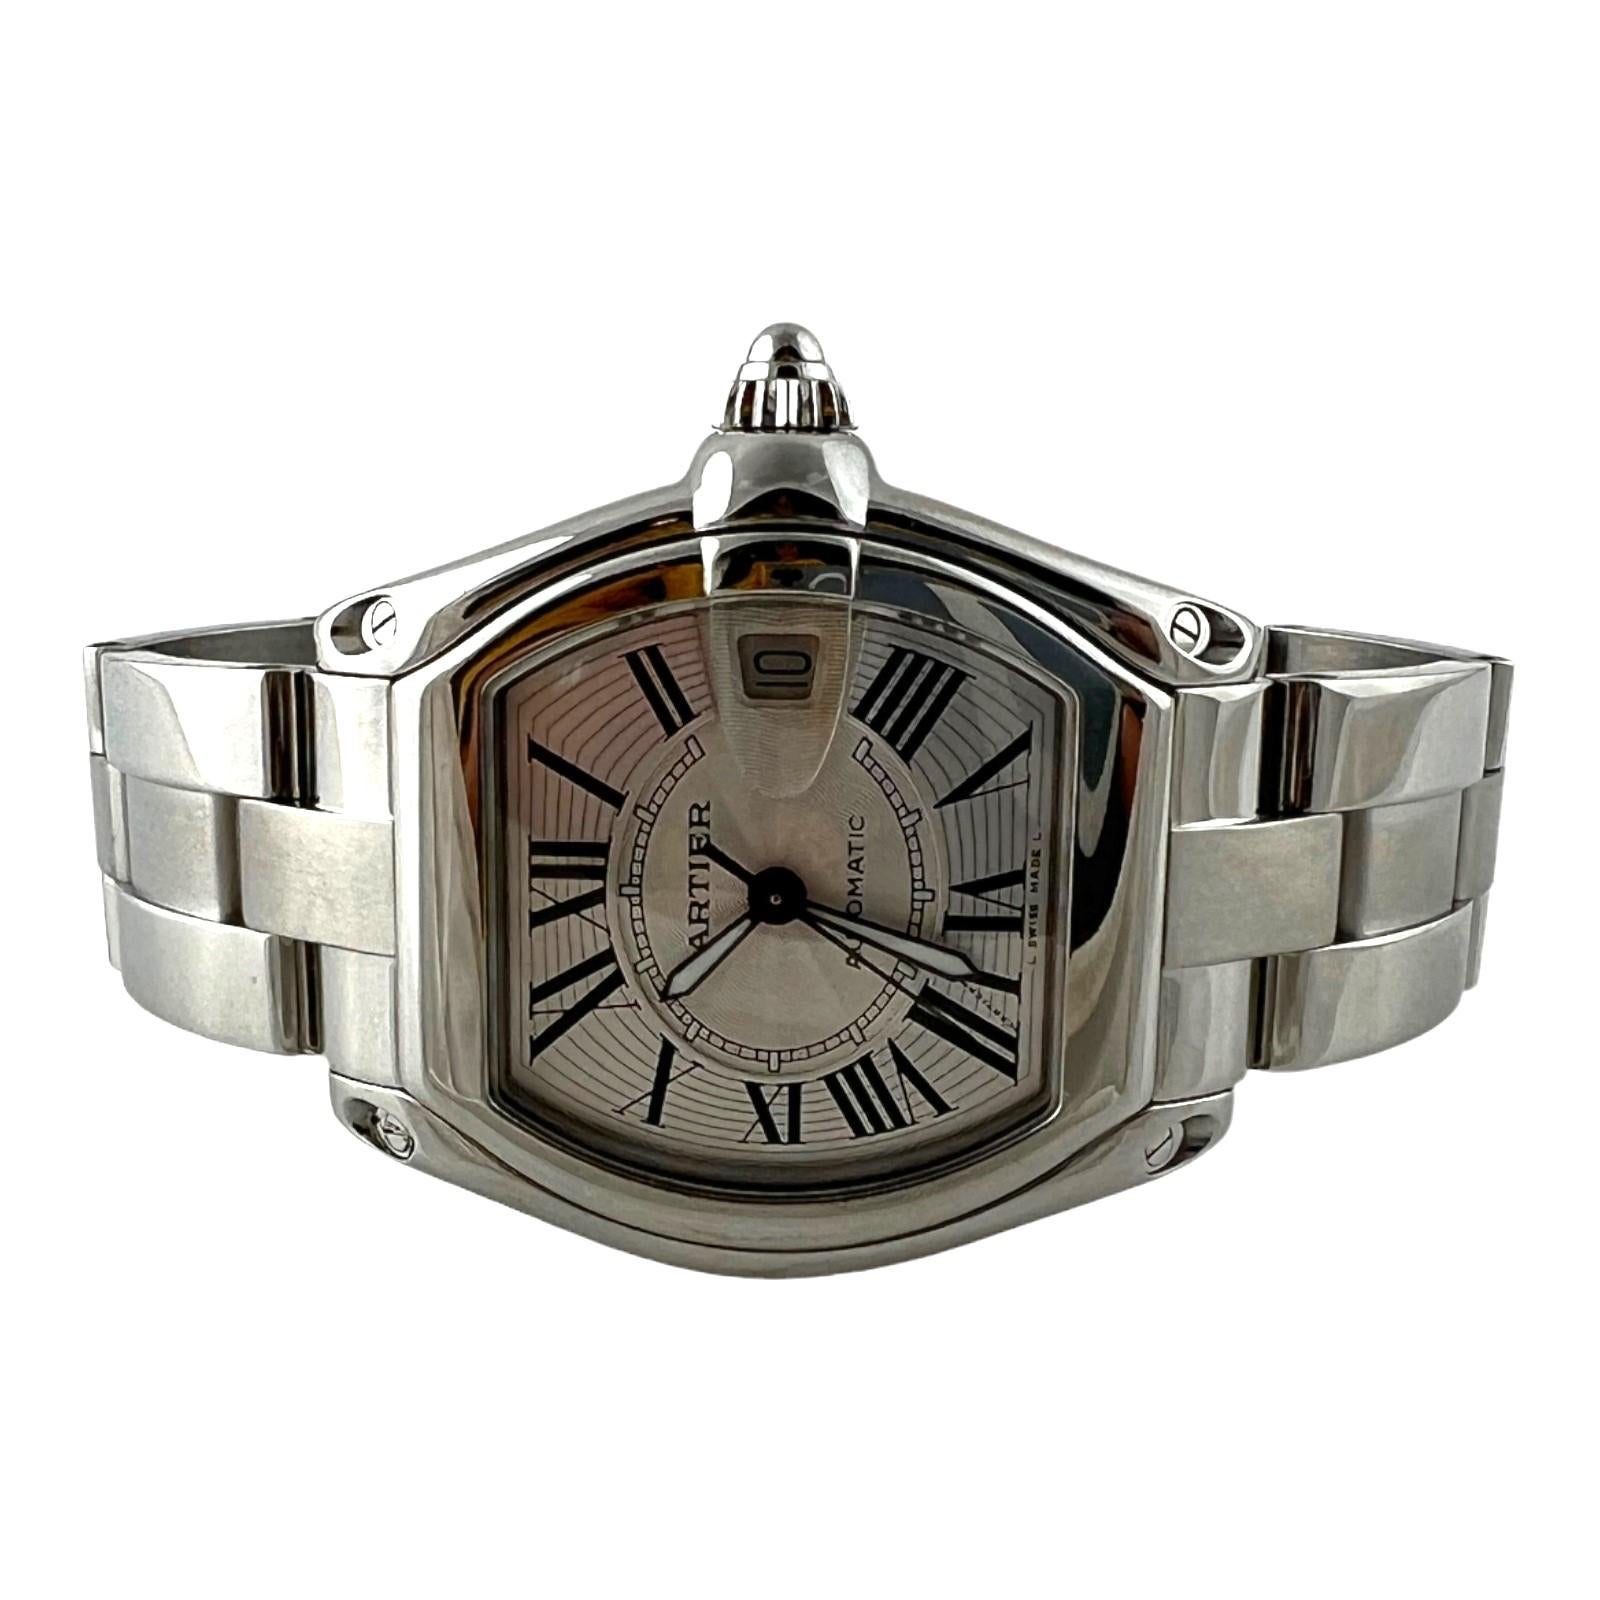 Cartier Roadster Large 2510 Automatic W62025V3 Stainless Watch 1